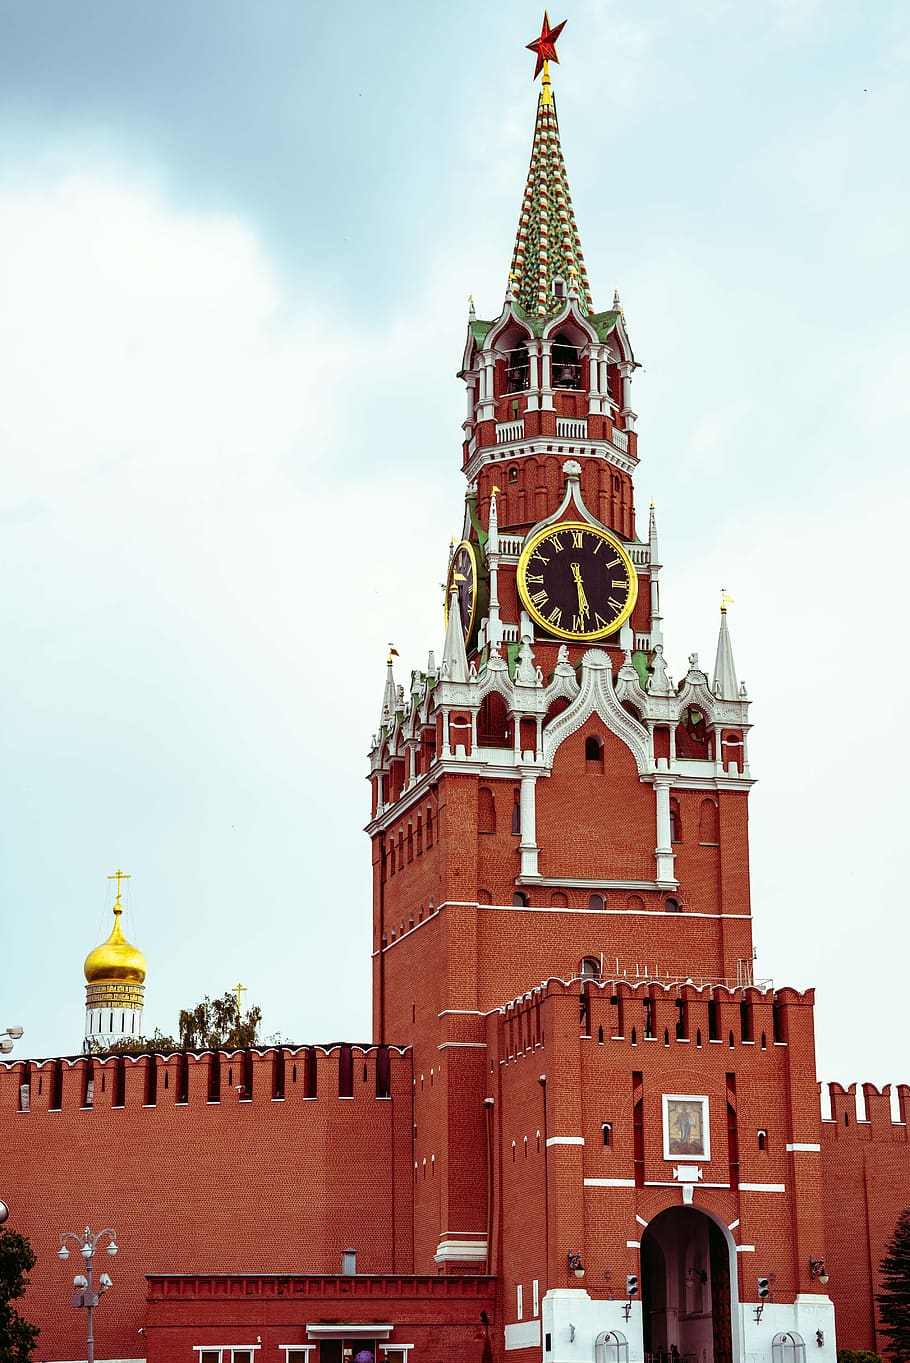 red square, russia, moscow, capital, historically, architecture, kremlin, tower, clock, wall